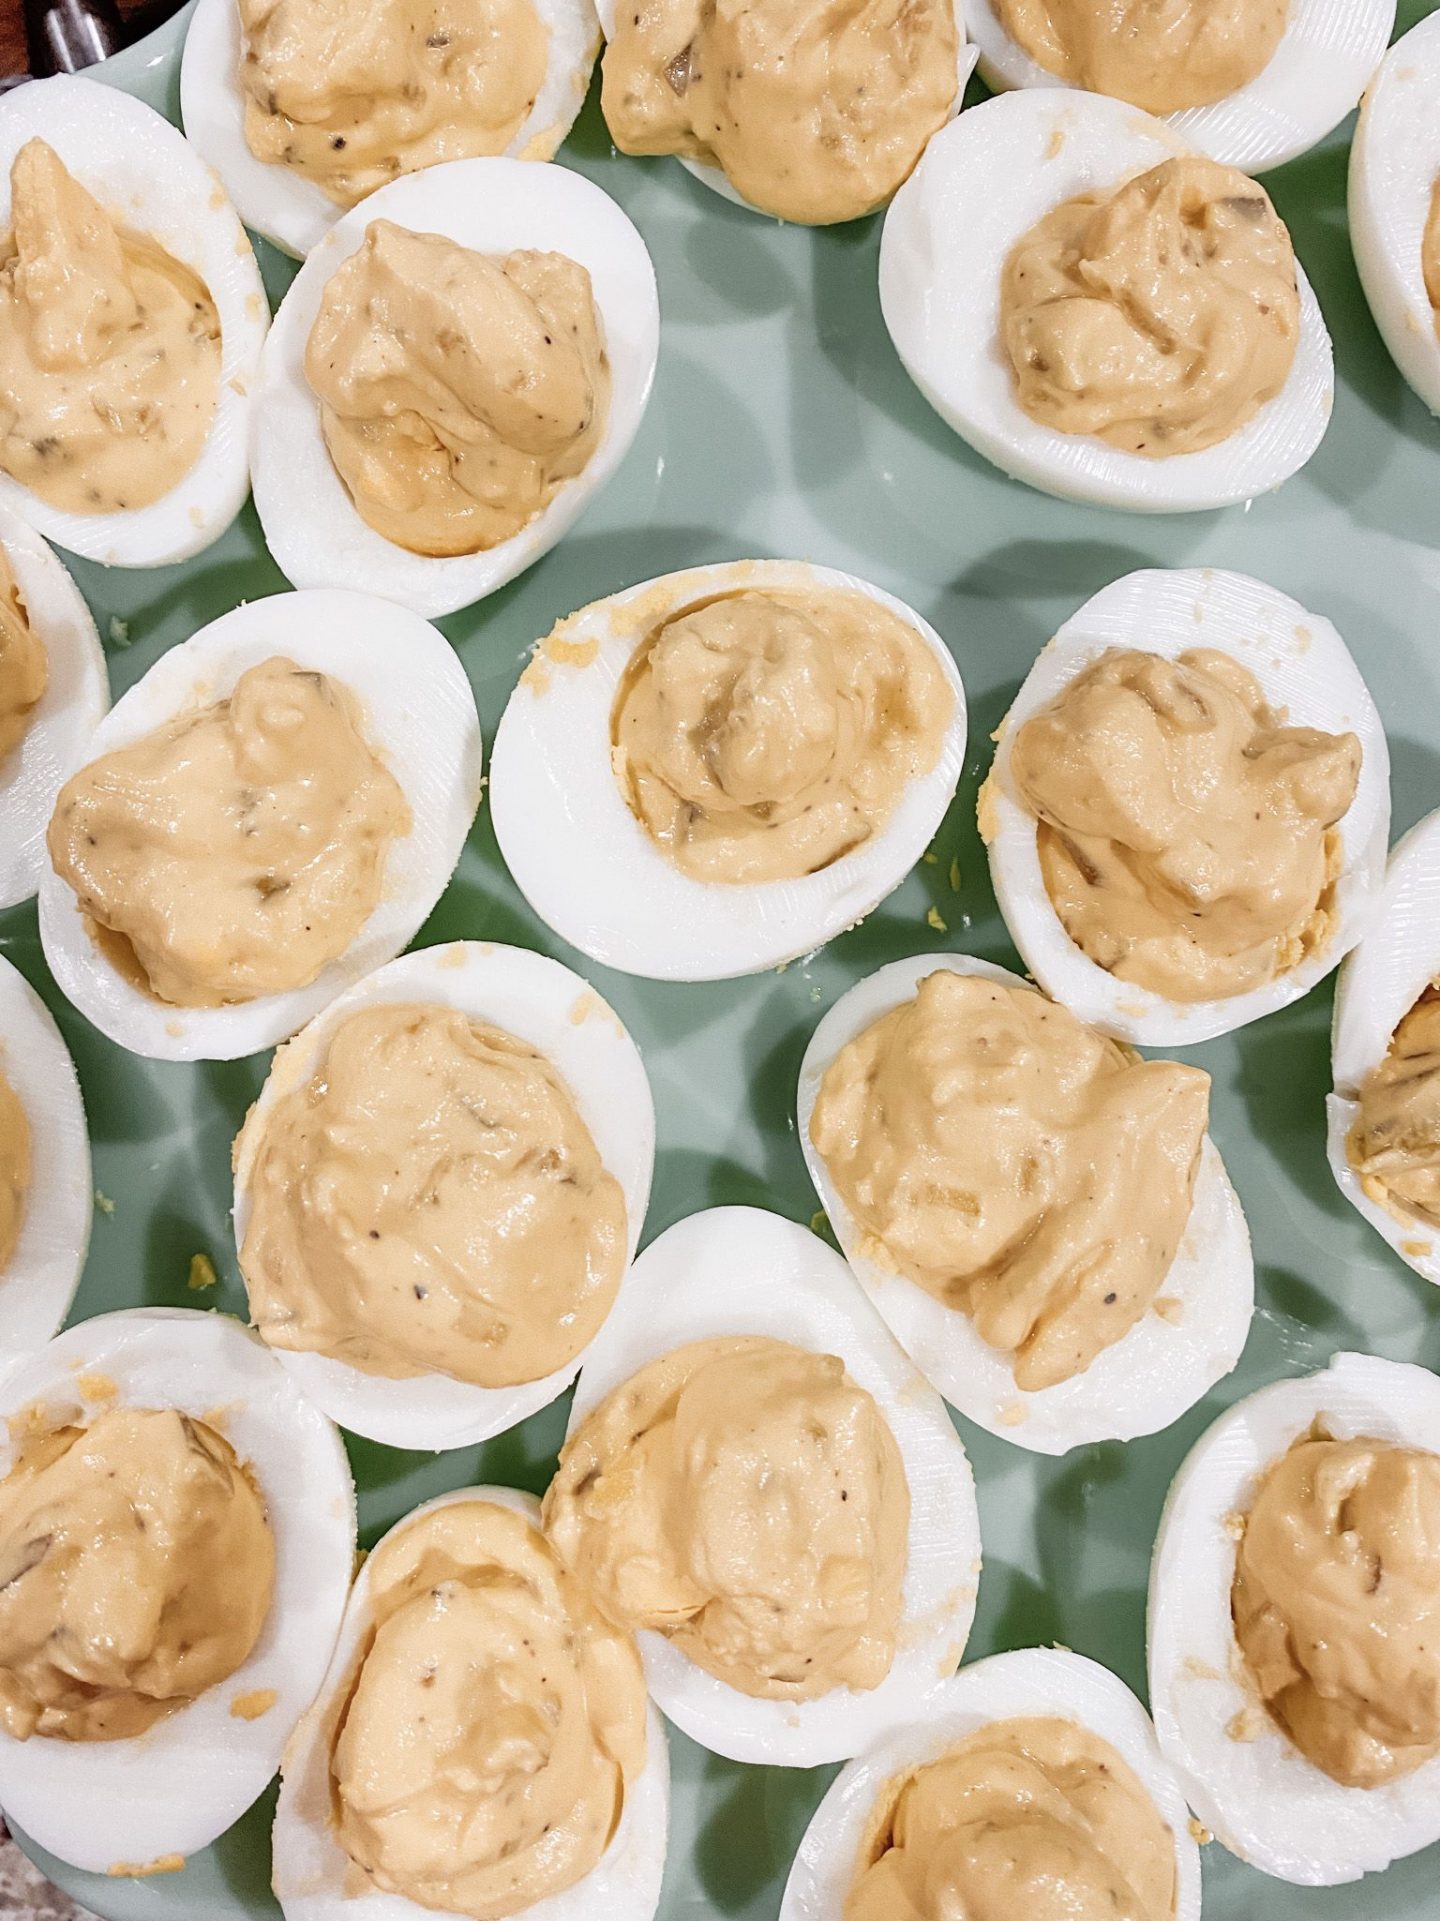 Healthy Snacks: Low Carb Keto Deviled Eggs Recipe by Alabama healthy living + food blogger, Heather Brown // My Life Well Loved